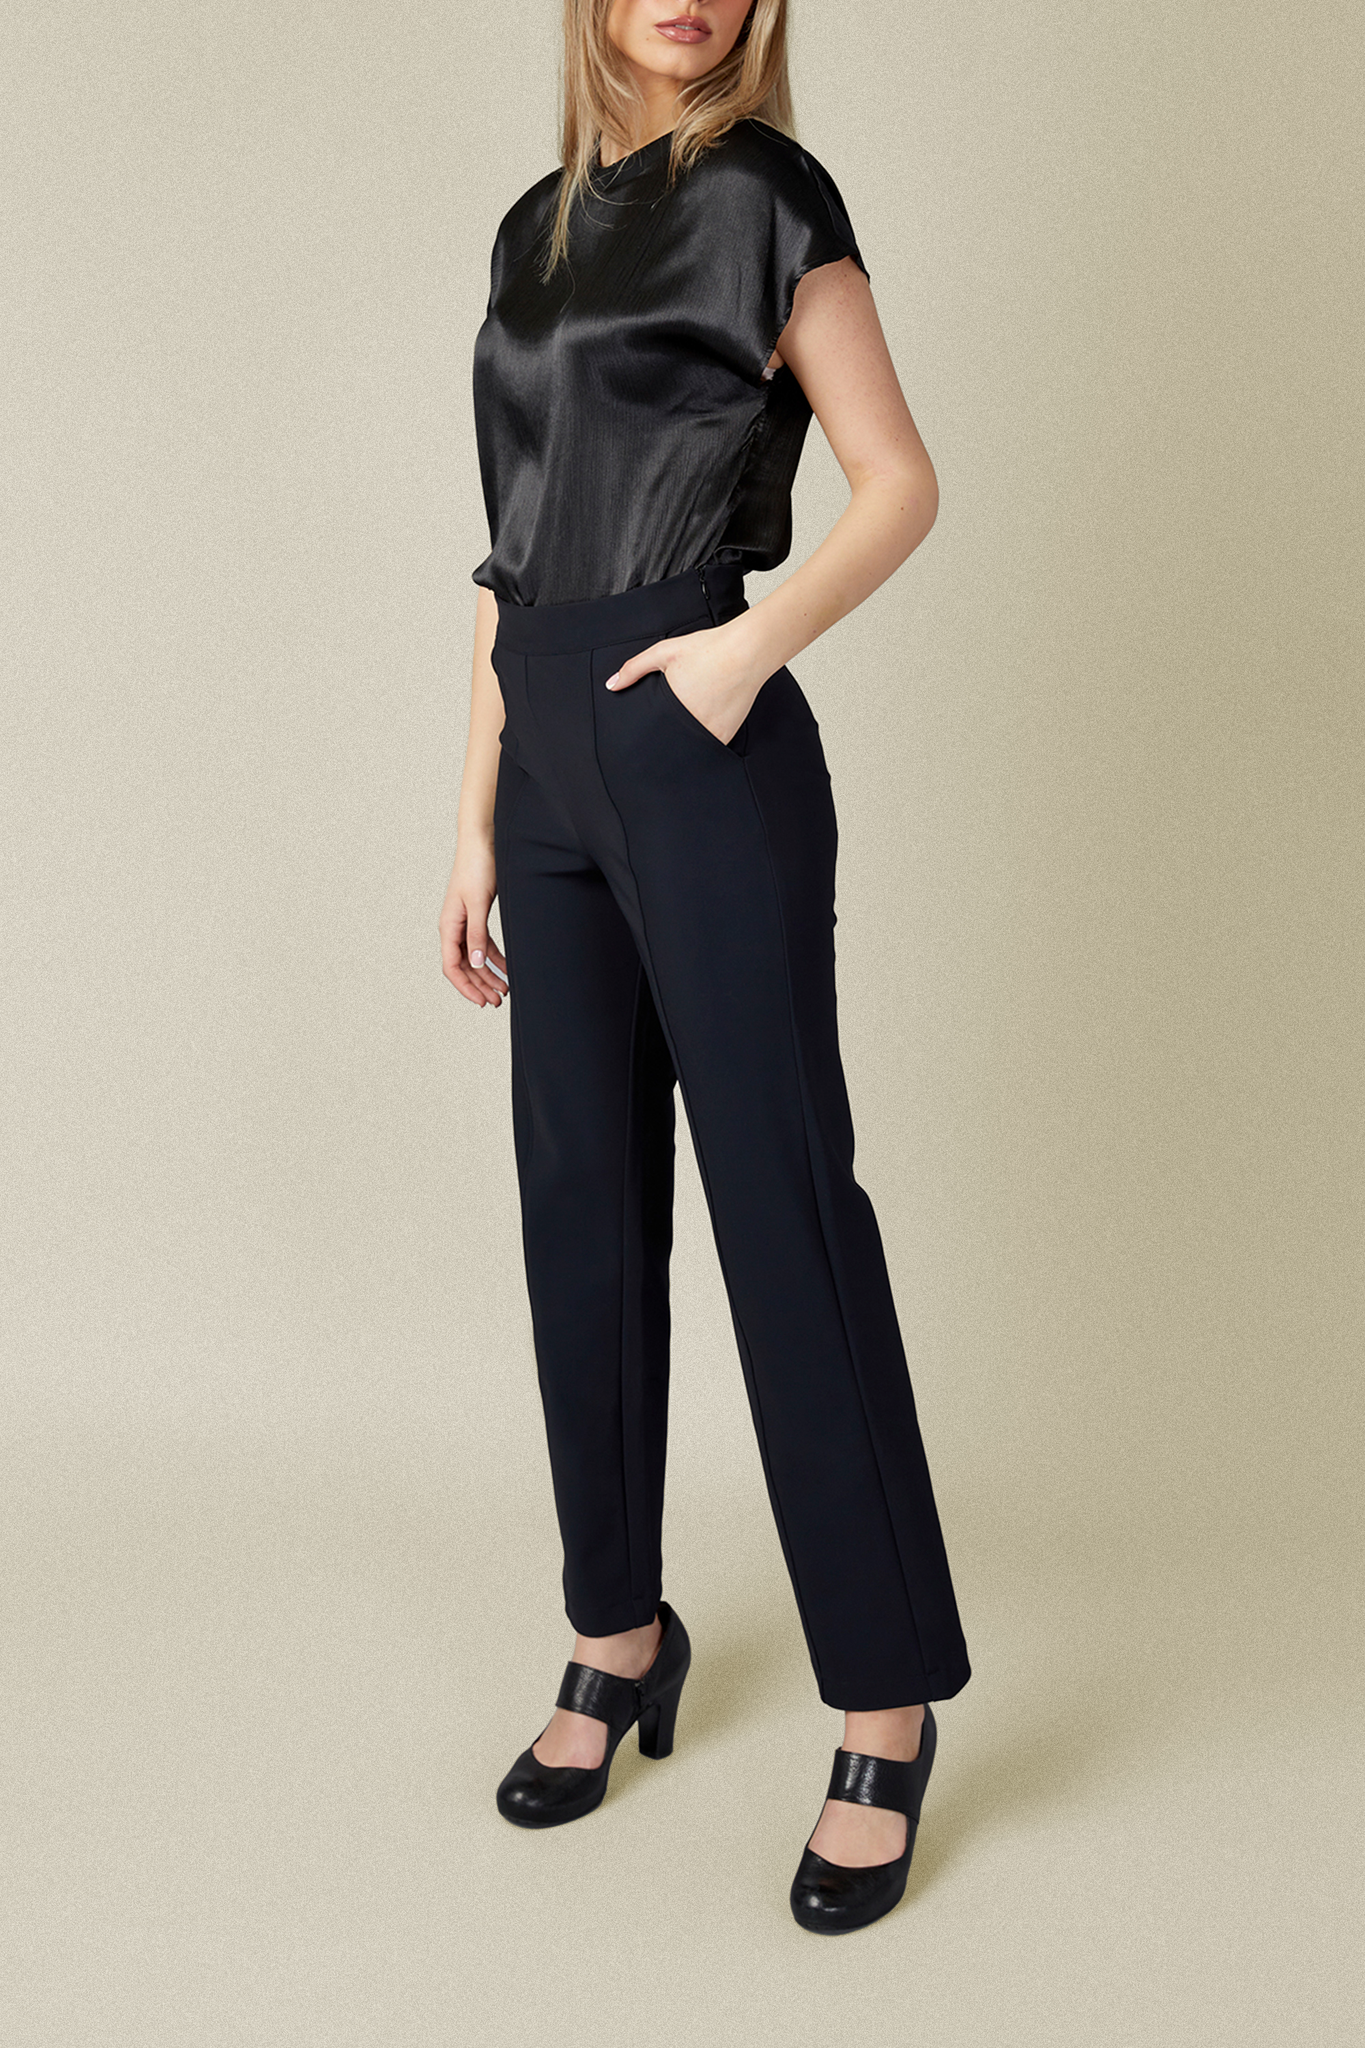 New Candle Fit Trousers - Straight Leg